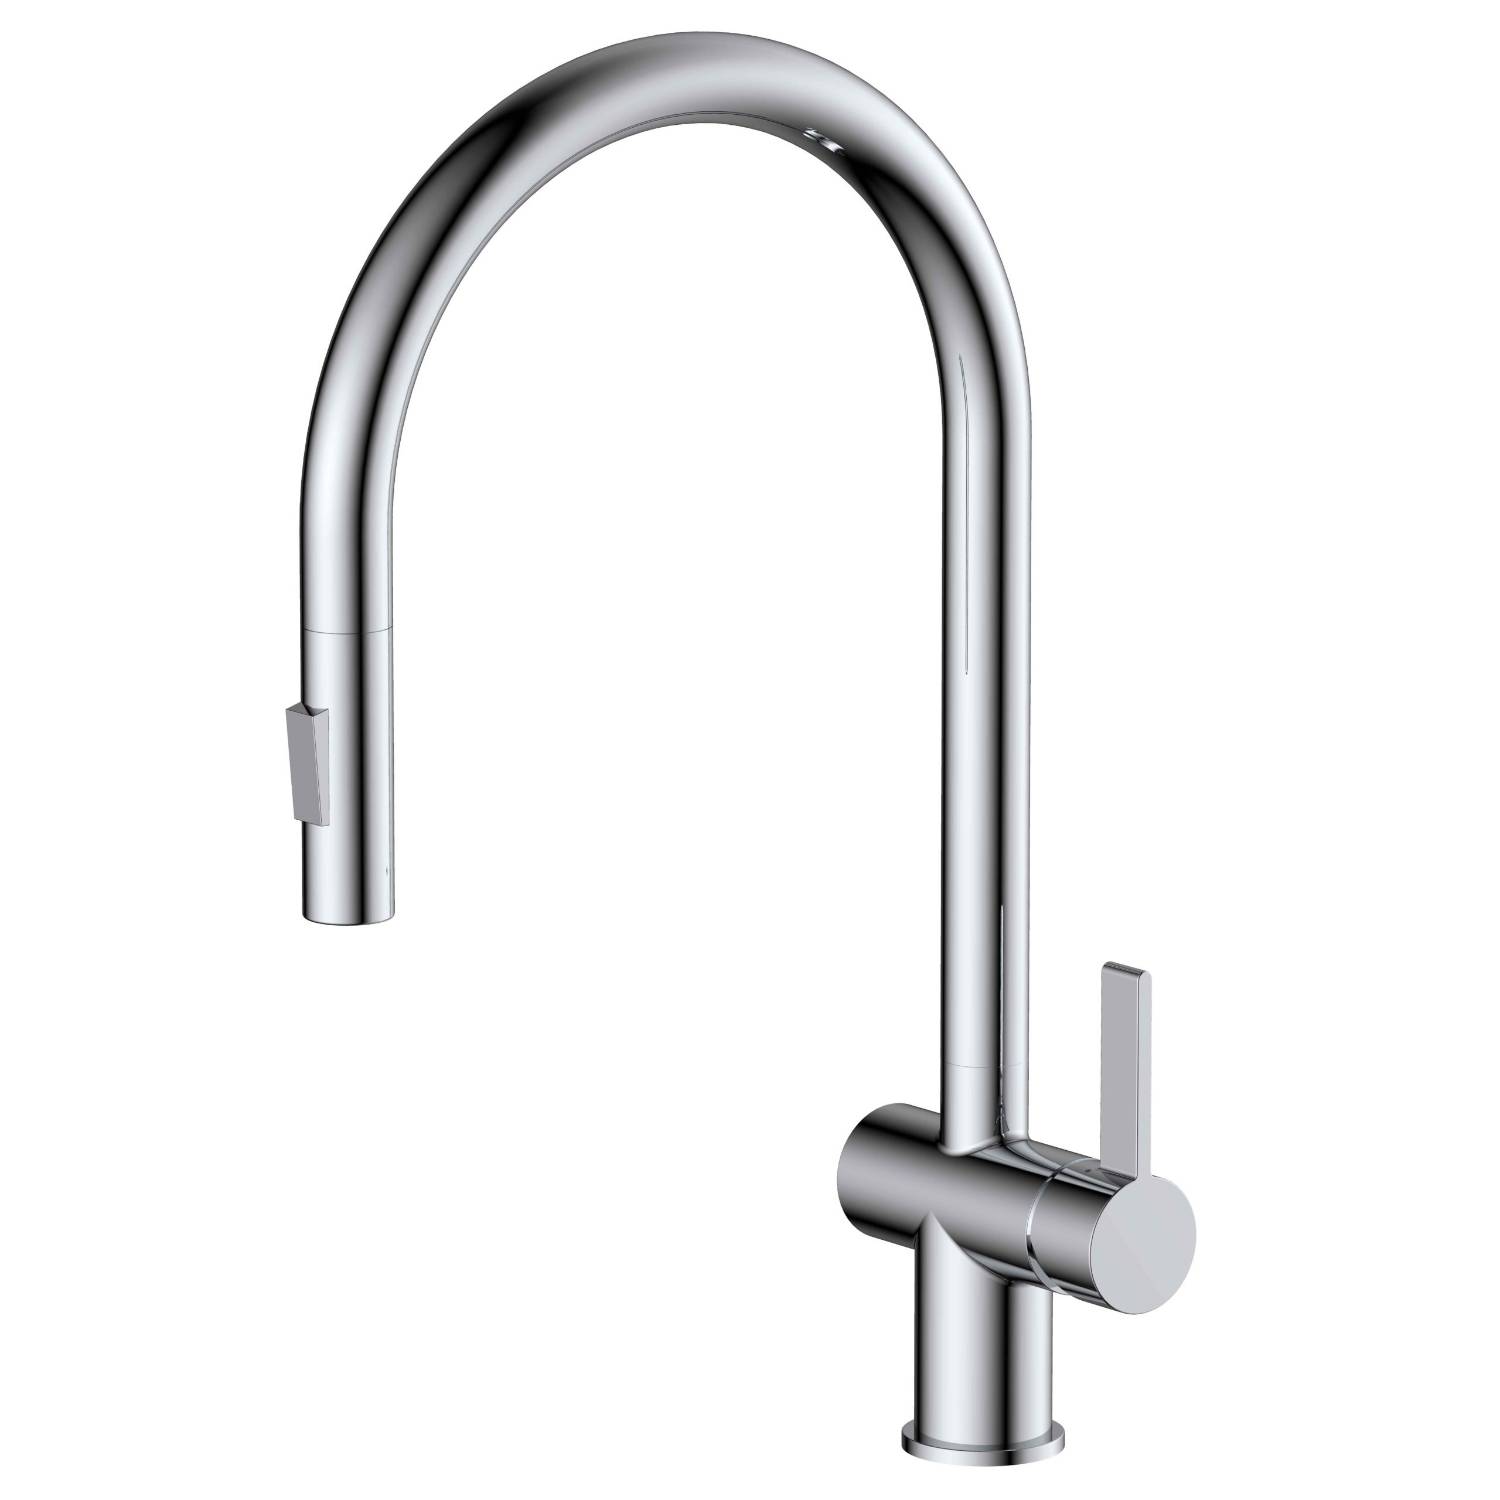 VOS Single Lever Pull Out Sink Mixer